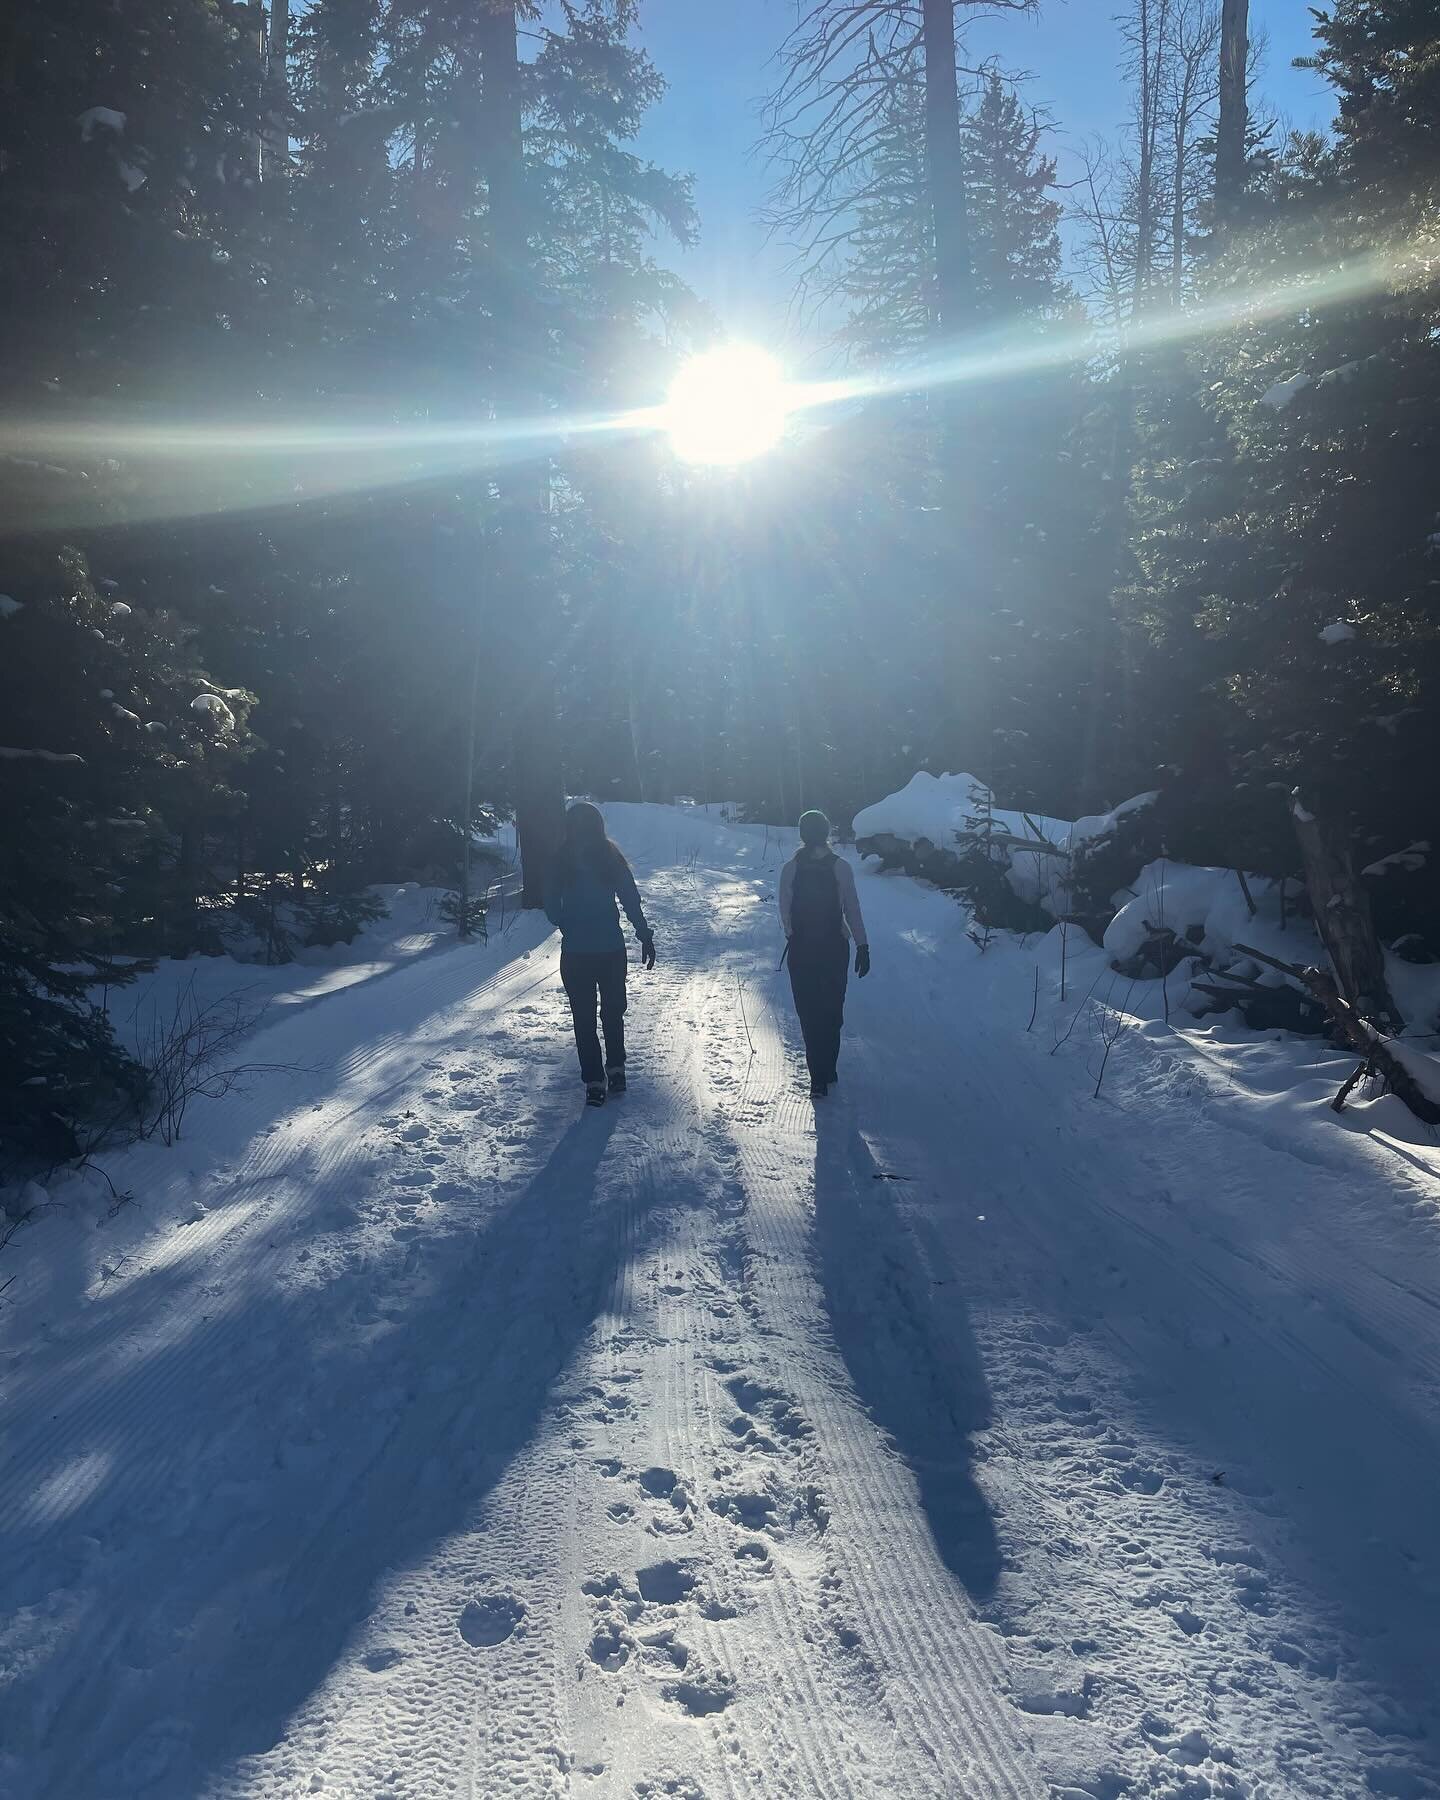 &ldquo;In every try walk with nature one receives more than she seeks.&rdquo; &mdash;John Muir
The weather is warmer than usual in the Rocky Mountains this season, and we got to enjoy the snow and the sunlight yesterday on a hike in Babbish Gulch.